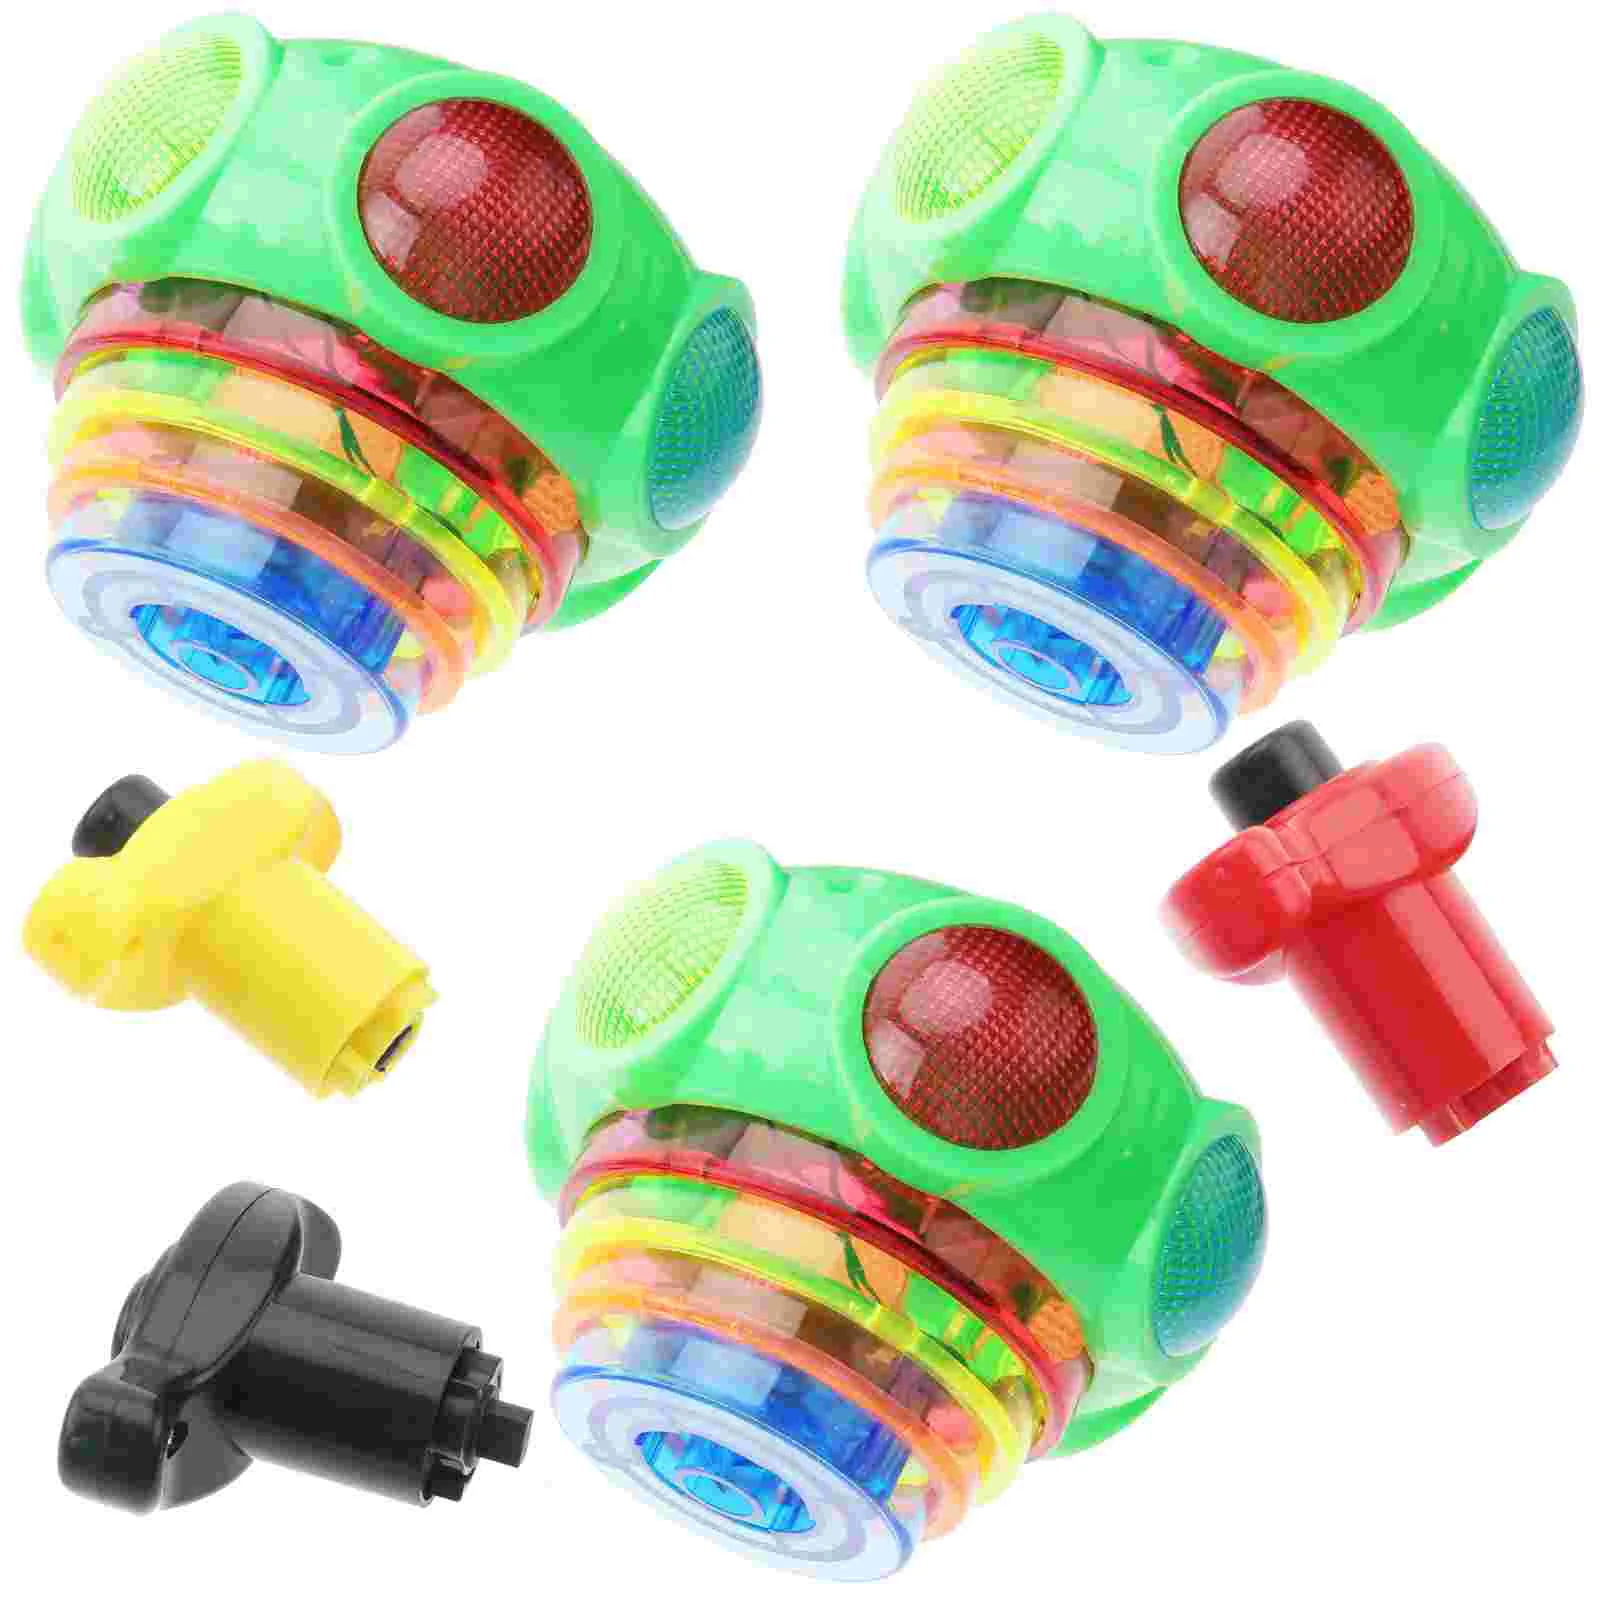 

3pcs Led Light Flashing Tops with Gyroscope Novelty Toys Party Favors Glow in the Dark